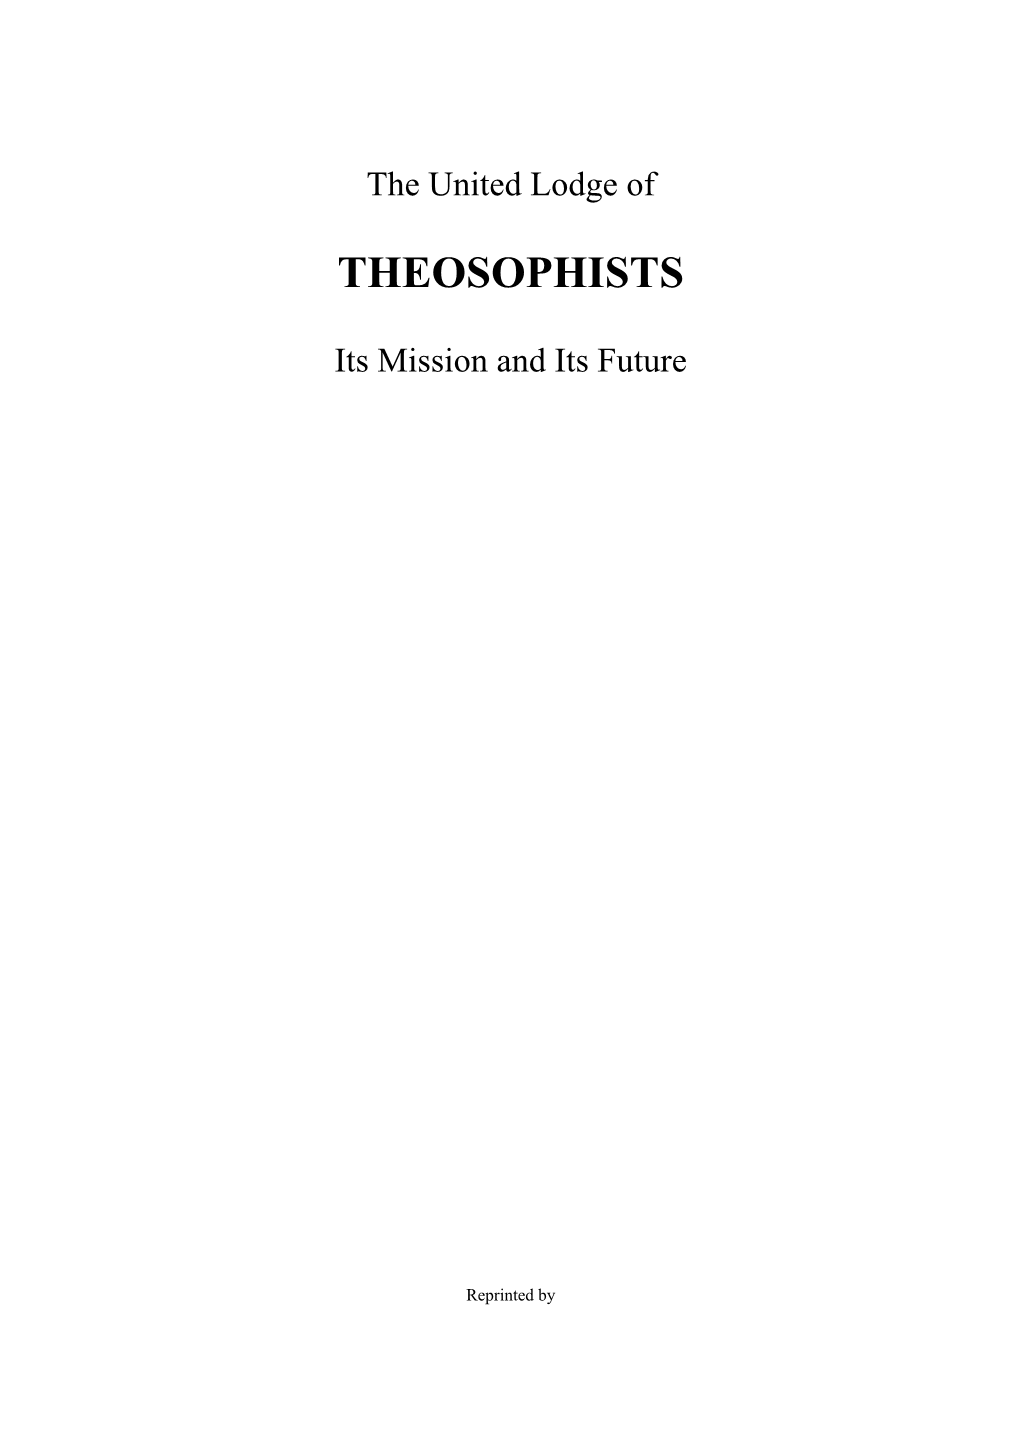 United Lodge of Theosophists: Its Mission and Its Future